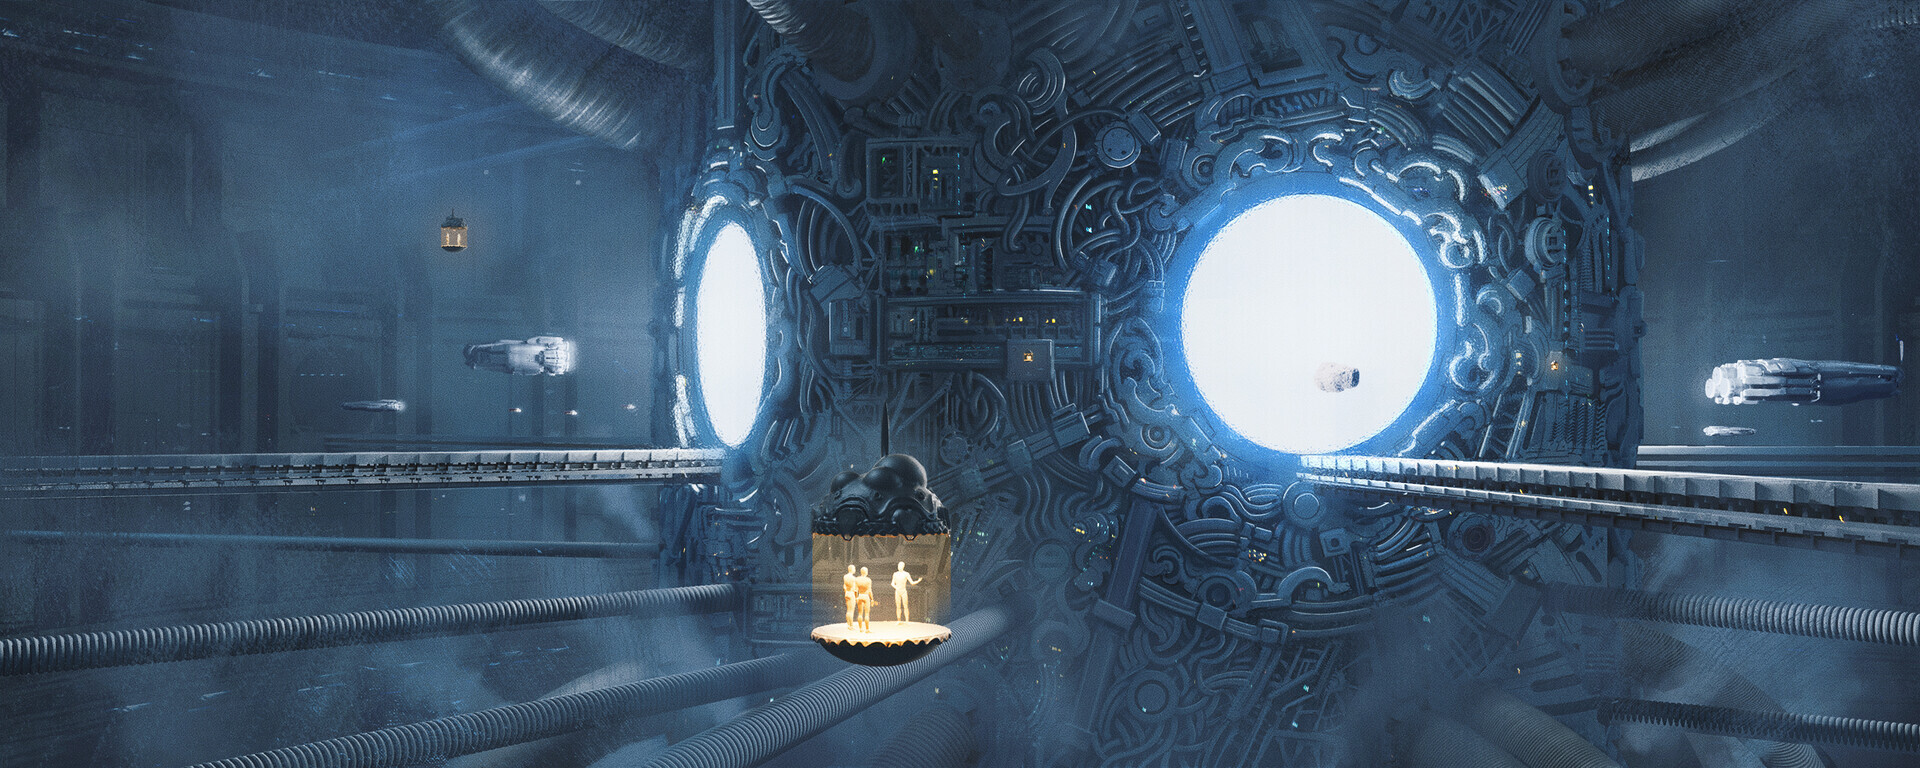 2D concept art depicting a large, cylindrical portal. Out of it come lots of pipes and metal details. There are spaceships and floating platforms with humans on them. The platforms are in a staggering contrast, all in yellow against the dominated in blue portal. Art by Victor Fritsch.